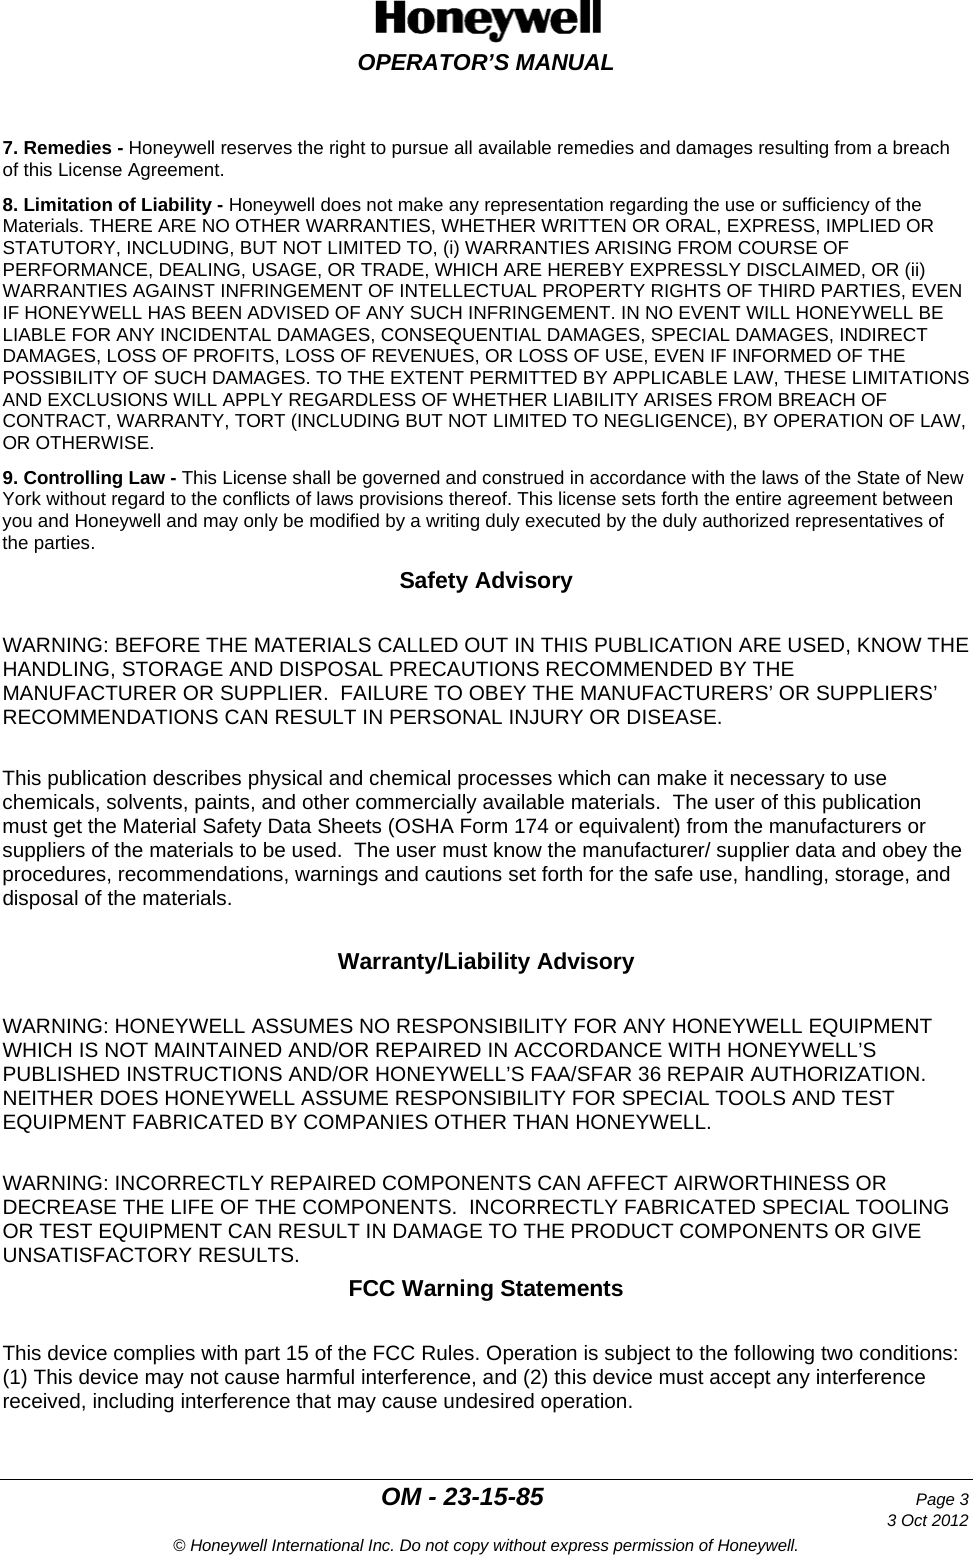  OPERATOR’S MANUAL  OM - 23-15-85 Page 3     3 Oct 2012 © Honeywell International Inc. Do not copy without express permission of Honeywell. 7. Remedies - Honeywell reserves the right to pursue all available remedies and damages resulting from a breach of this License Agreement. 8. Limitation of Liability - Honeywell does not make any representation regarding the use or sufficiency of the Materials. THERE ARE NO OTHER WARRANTIES, WHETHER WRITTEN OR ORAL, EXPRESS, IMPLIED OR STATUTORY, INCLUDING, BUT NOT LIMITED TO, (i) WARRANTIES ARISING FROM COURSE OF PERFORMANCE, DEALING, USAGE, OR TRADE, WHICH ARE HEREBY EXPRESSLY DISCLAIMED, OR (ii) WARRANTIES AGAINST INFRINGEMENT OF INTELLECTUAL PROPERTY RIGHTS OF THIRD PARTIES, EVEN IF HONEYWELL HAS BEEN ADVISED OF ANY SUCH INFRINGEMENT. IN NO EVENT WILL HONEYWELL BE LIABLE FOR ANY INCIDENTAL DAMAGES, CONSEQUENTIAL DAMAGES, SPECIAL DAMAGES, INDIRECT DAMAGES, LOSS OF PROFITS, LOSS OF REVENUES, OR LOSS OF USE, EVEN IF INFORMED OF THE POSSIBILITY OF SUCH DAMAGES. TO THE EXTENT PERMITTED BY APPLICABLE LAW, THESE LIMITATIONS AND EXCLUSIONS WILL APPLY REGARDLESS OF WHETHER LIABILITY ARISES FROM BREACH OF CONTRACT, WARRANTY, TORT (INCLUDING BUT NOT LIMITED TO NEGLIGENCE), BY OPERATION OF LAW, OR OTHERWISE. 9. Controlling Law - This License shall be governed and construed in accordance with the laws of the State of New York without regard to the conflicts of laws provisions thereof. This license sets forth the entire agreement between you and Honeywell and may only be modified by a writing duly executed by the duly authorized representatives of the parties. Safety Advisory  WARNING: BEFORE THE MATERIALS CALLED OUT IN THIS PUBLICATION ARE USED, KNOW THE HANDLING, STORAGE AND DISPOSAL PRECAUTIONS RECOMMENDED BY THE MANUFACTURER OR SUPPLIER.  FAILURE TO OBEY THE MANUFACTURERS’ OR SUPPLIERS’ RECOMMENDATIONS CAN RESULT IN PERSONAL INJURY OR DISEASE.  This publication describes physical and chemical processes which can make it necessary to use chemicals, solvents, paints, and other commercially available materials.  The user of this publication must get the Material Safety Data Sheets (OSHA Form 174 or equivalent) from the manufacturers or suppliers of the materials to be used.  The user must know the manufacturer/ supplier data and obey the procedures, recommendations, warnings and cautions set forth for the safe use, handling, storage, and disposal of the materials.  Warranty/Liability Advisory  WARNING: HONEYWELL ASSUMES NO RESPONSIBILITY FOR ANY HONEYWELL EQUIPMENT WHICH IS NOT MAINTAINED AND/OR REPAIRED IN ACCORDANCE WITH HONEYWELL’S PUBLISHED INSTRUCTIONS AND/OR HONEYWELL’S FAA/SFAR 36 REPAIR AUTHORIZATION.  NEITHER DOES HONEYWELL ASSUME RESPONSIBILITY FOR SPECIAL TOOLS AND TEST EQUIPMENT FABRICATED BY COMPANIES OTHER THAN HONEYWELL.  WARNING: INCORRECTLY REPAIRED COMPONENTS CAN AFFECT AIRWORTHINESS OR DECREASE THE LIFE OF THE COMPONENTS.  INCORRECTLY FABRICATED SPECIAL TOOLING OR TEST EQUIPMENT CAN RESULT IN DAMAGE TO THE PRODUCT COMPONENTS OR GIVE UNSATISFACTORY RESULTS. FCC Warning Statements  This device complies with part 15 of the FCC Rules. Operation is subject to the following two conditions: (1) This device may not cause harmful interference, and (2) this device must accept any interference received, including interference that may cause undesired operation.   